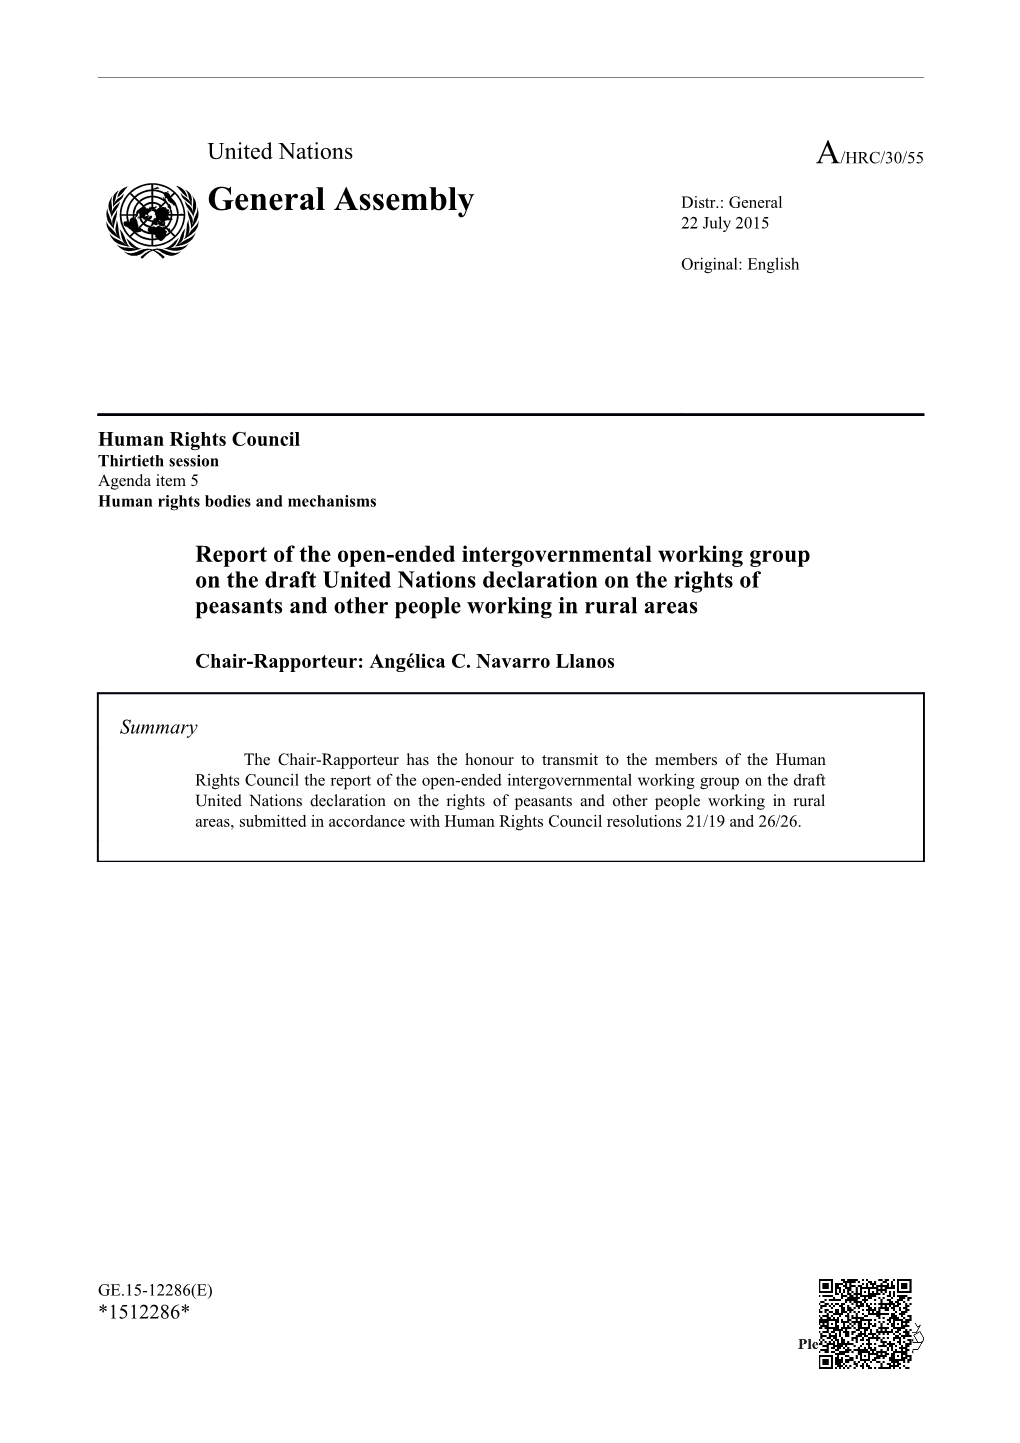 Report of the Open-Ended Intergovernmental Working Group on the Draft United Nations Declaration